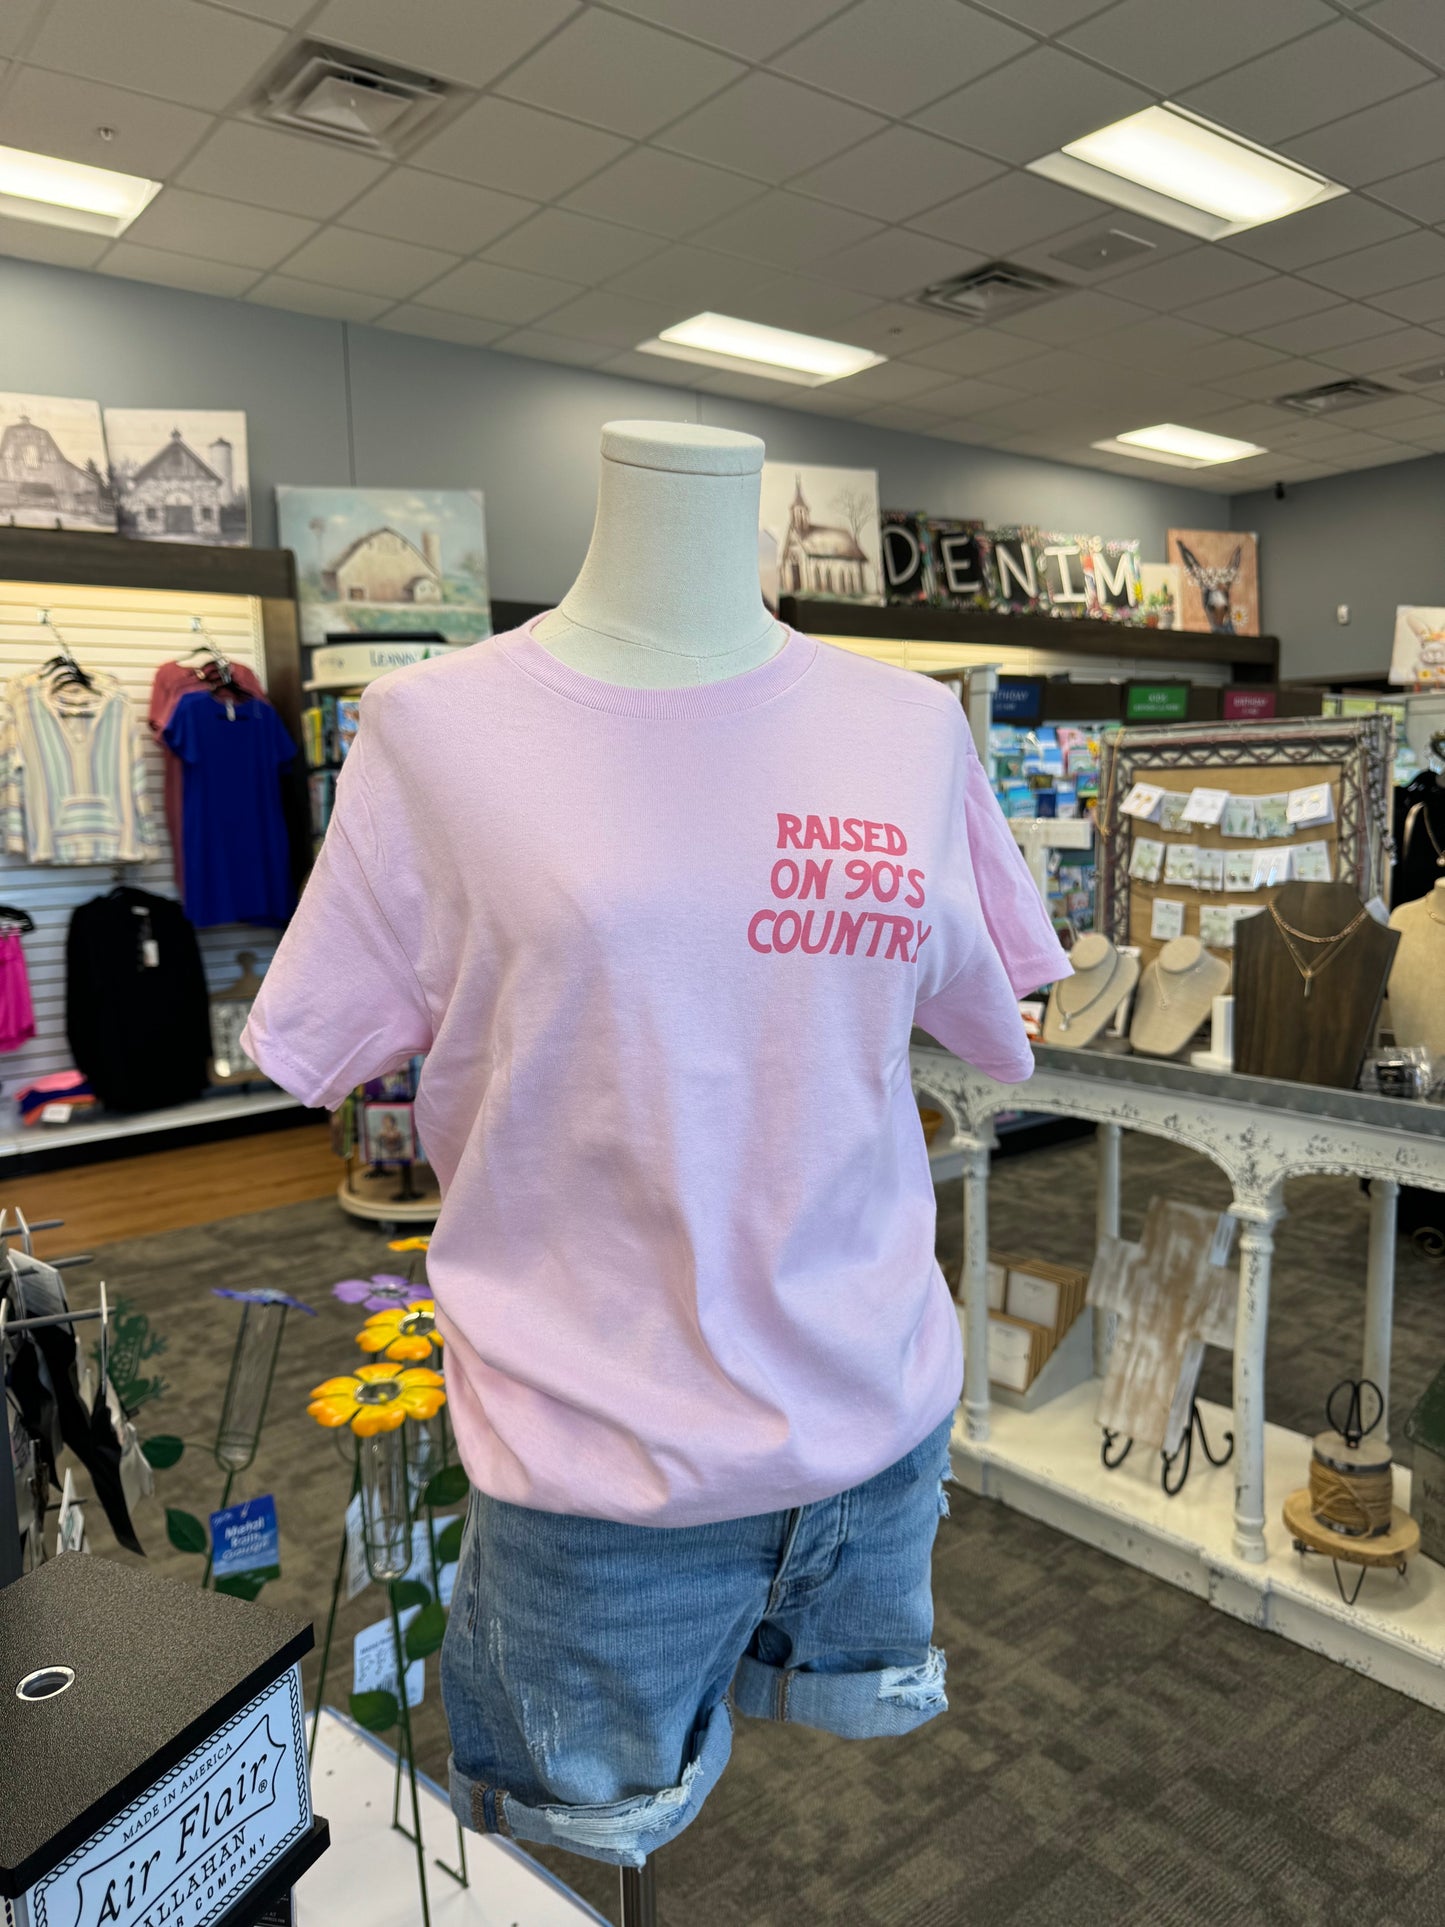 “Raised on 90’s Country” T-Shirt